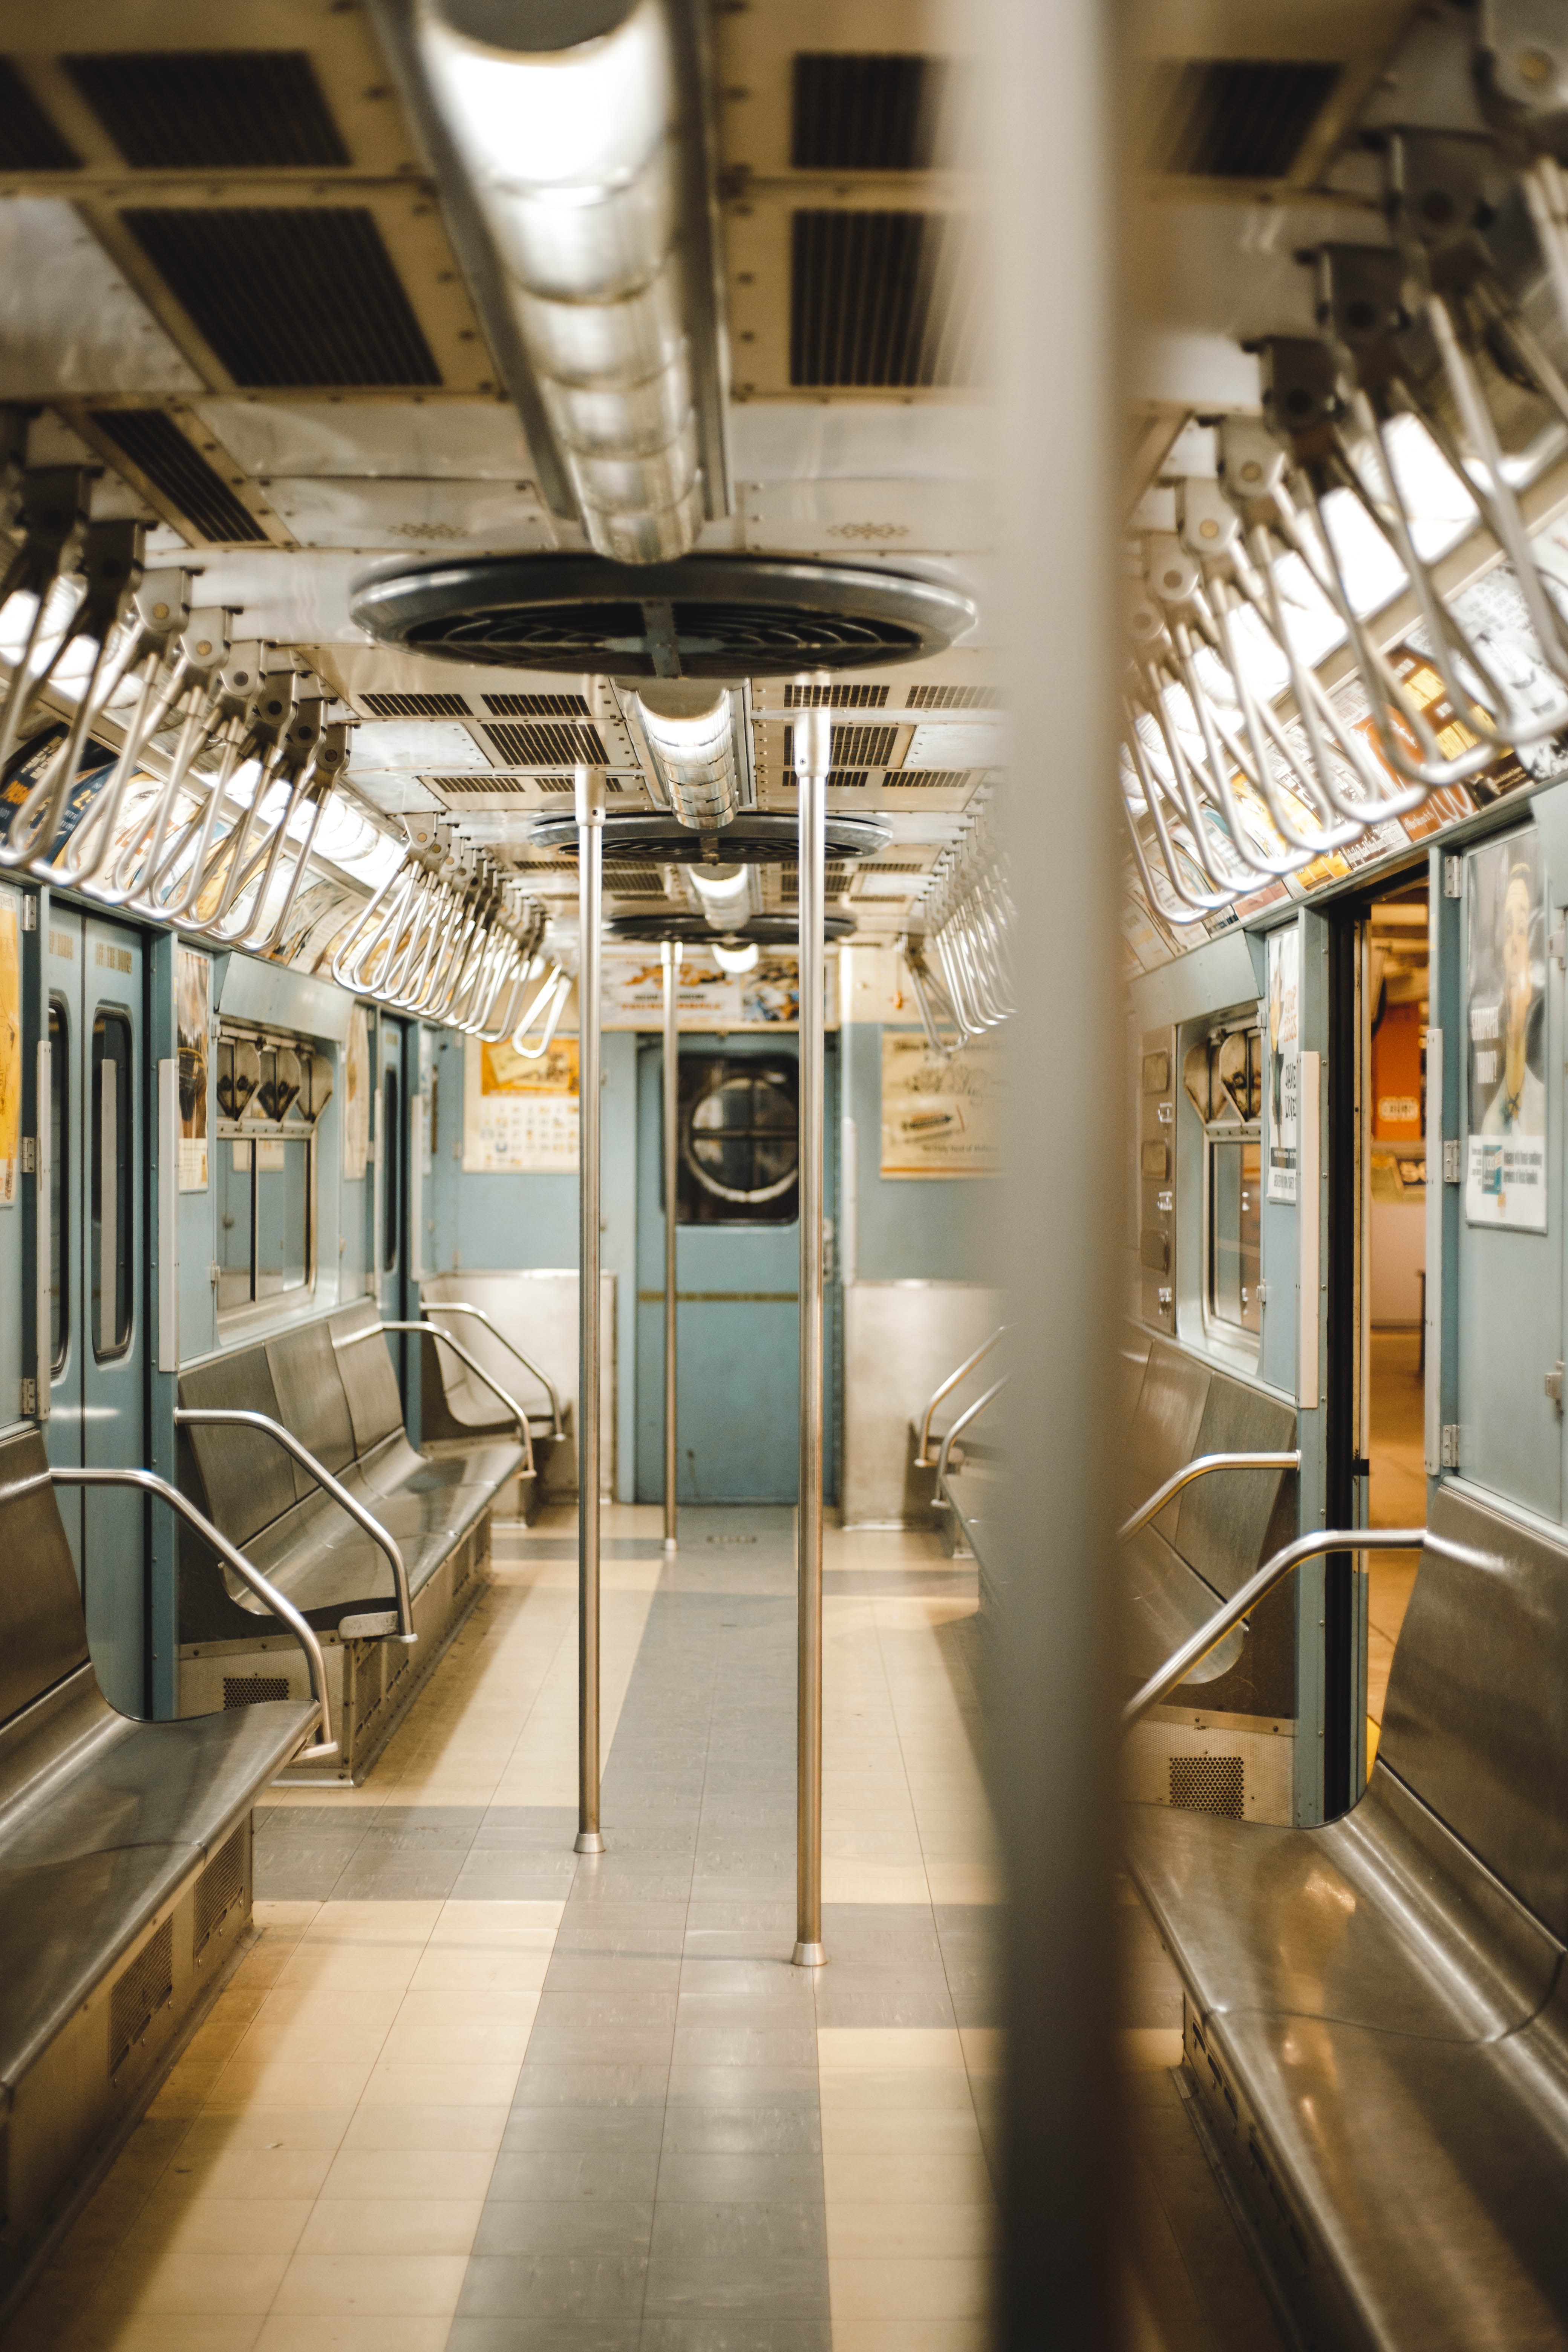 How Remote Work is Affecting Public Transportation